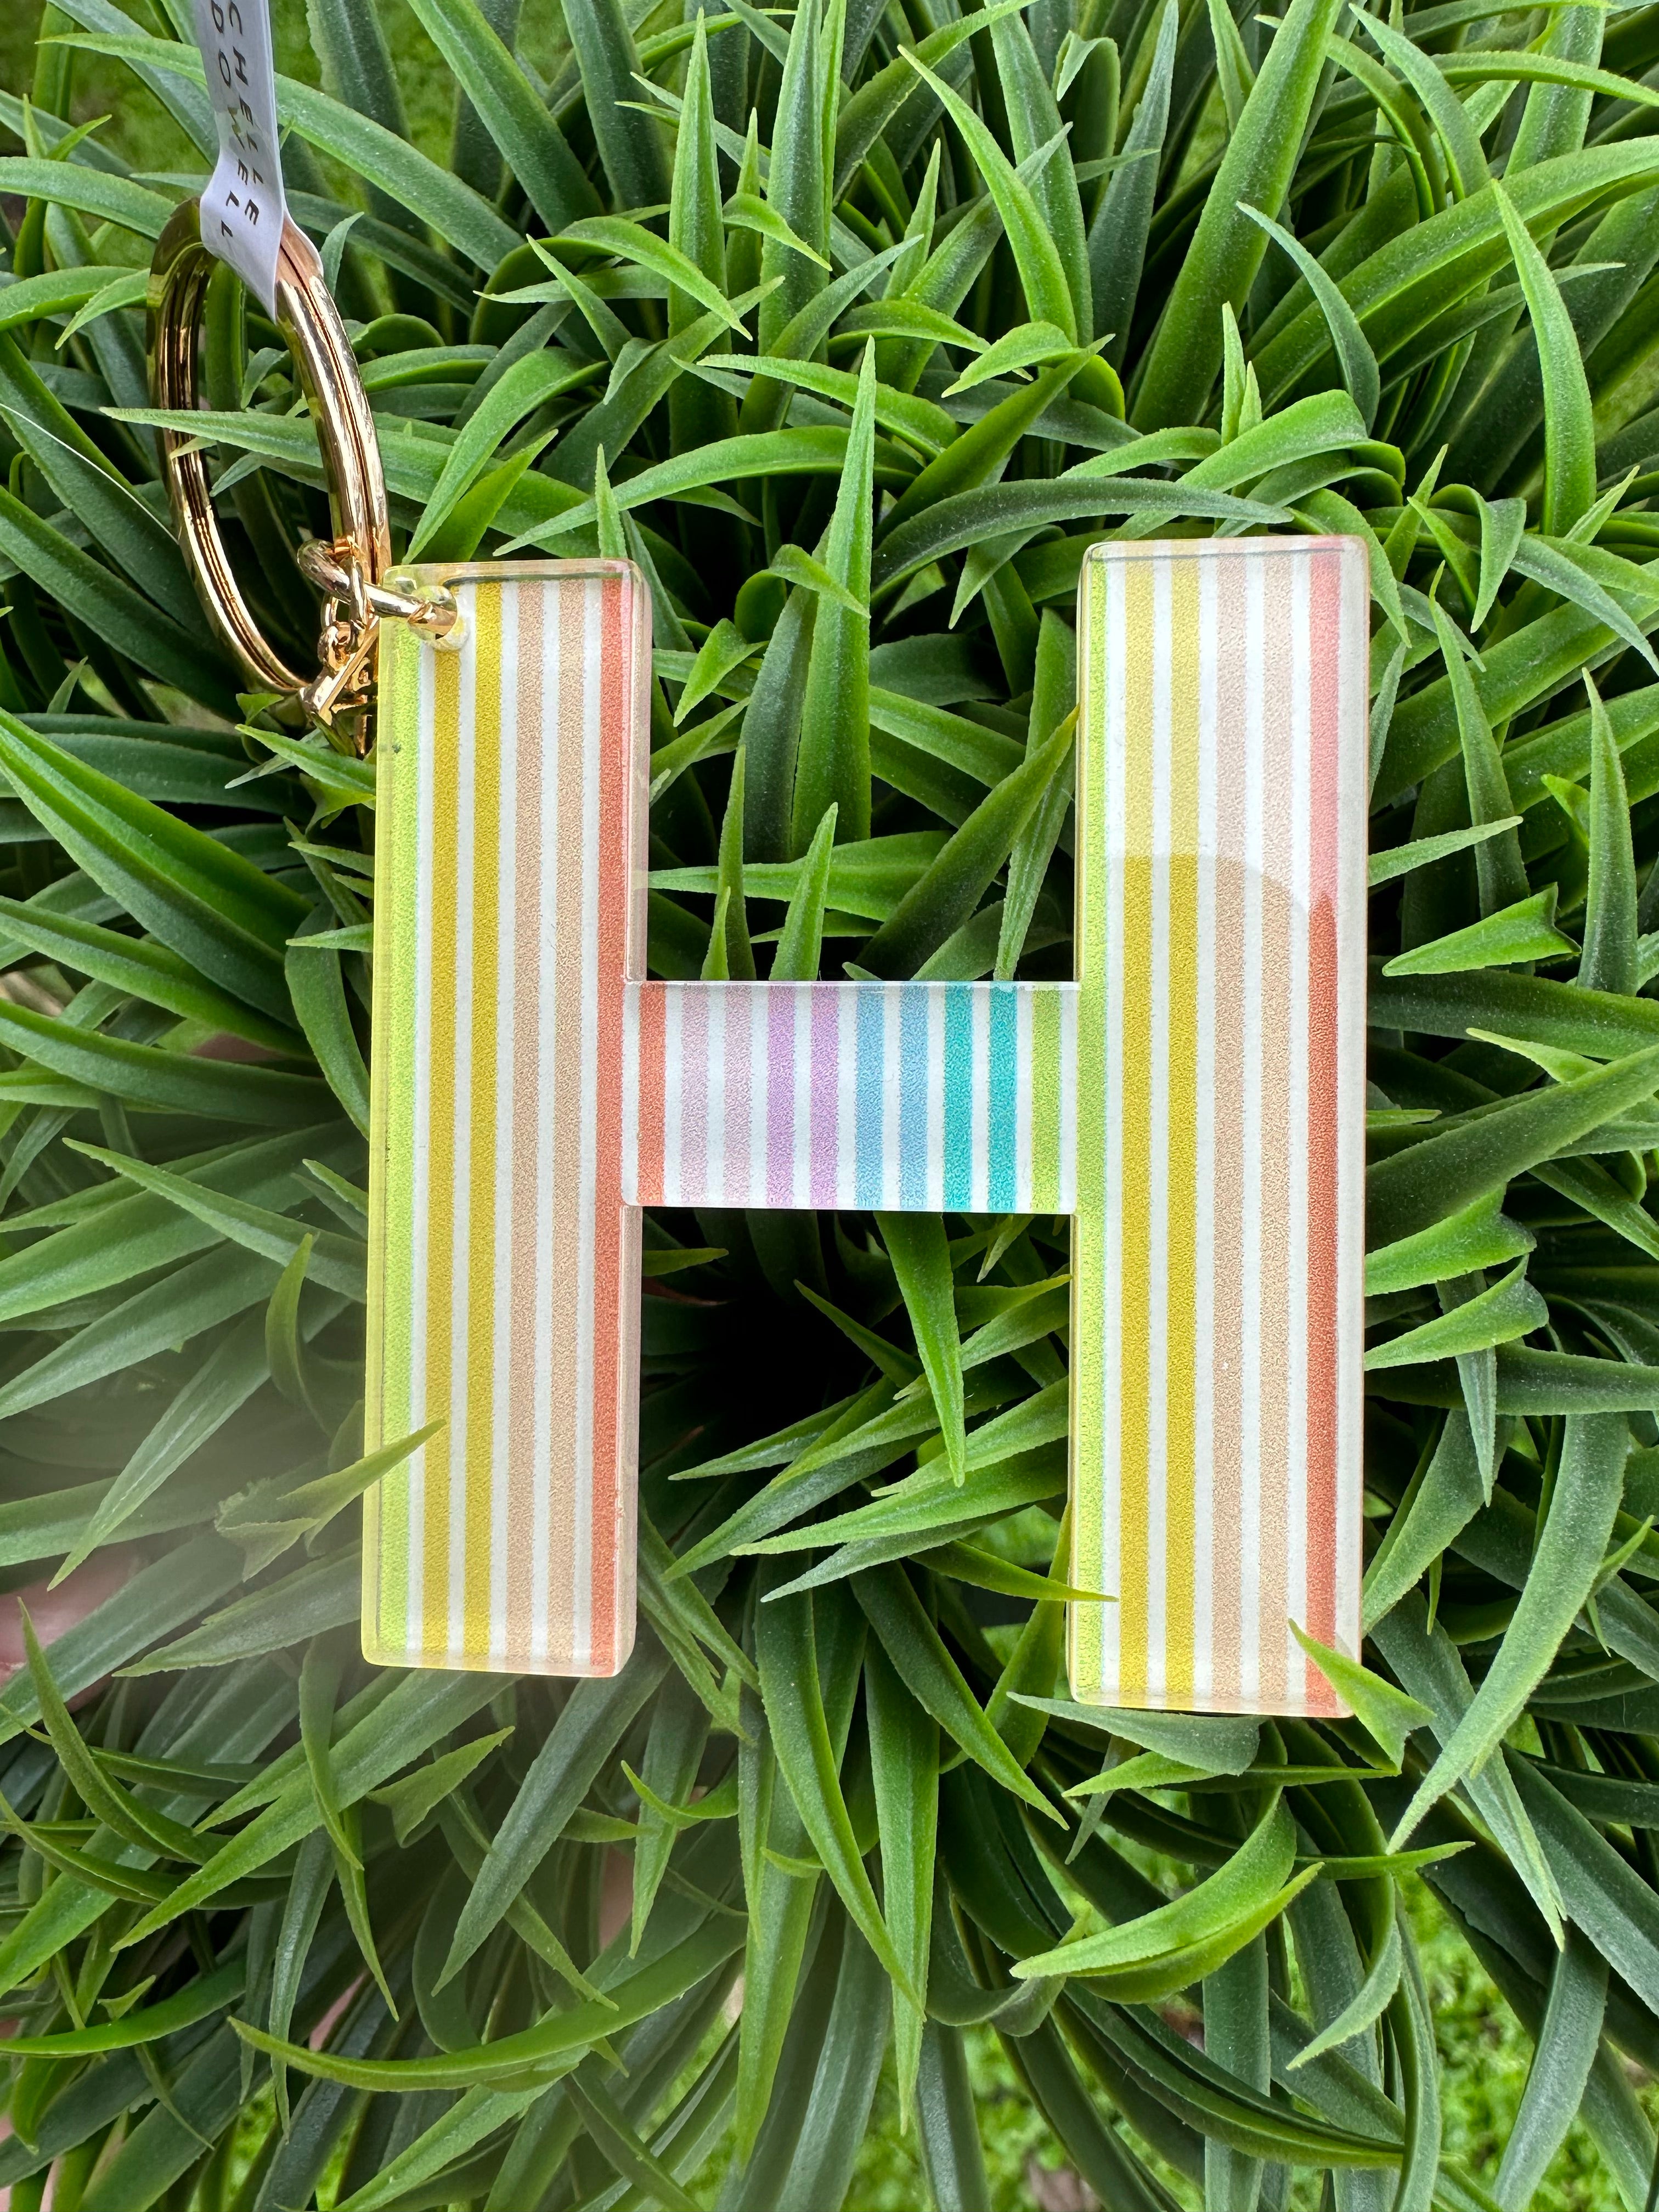 PATTERNED "H" KEYCHAIN